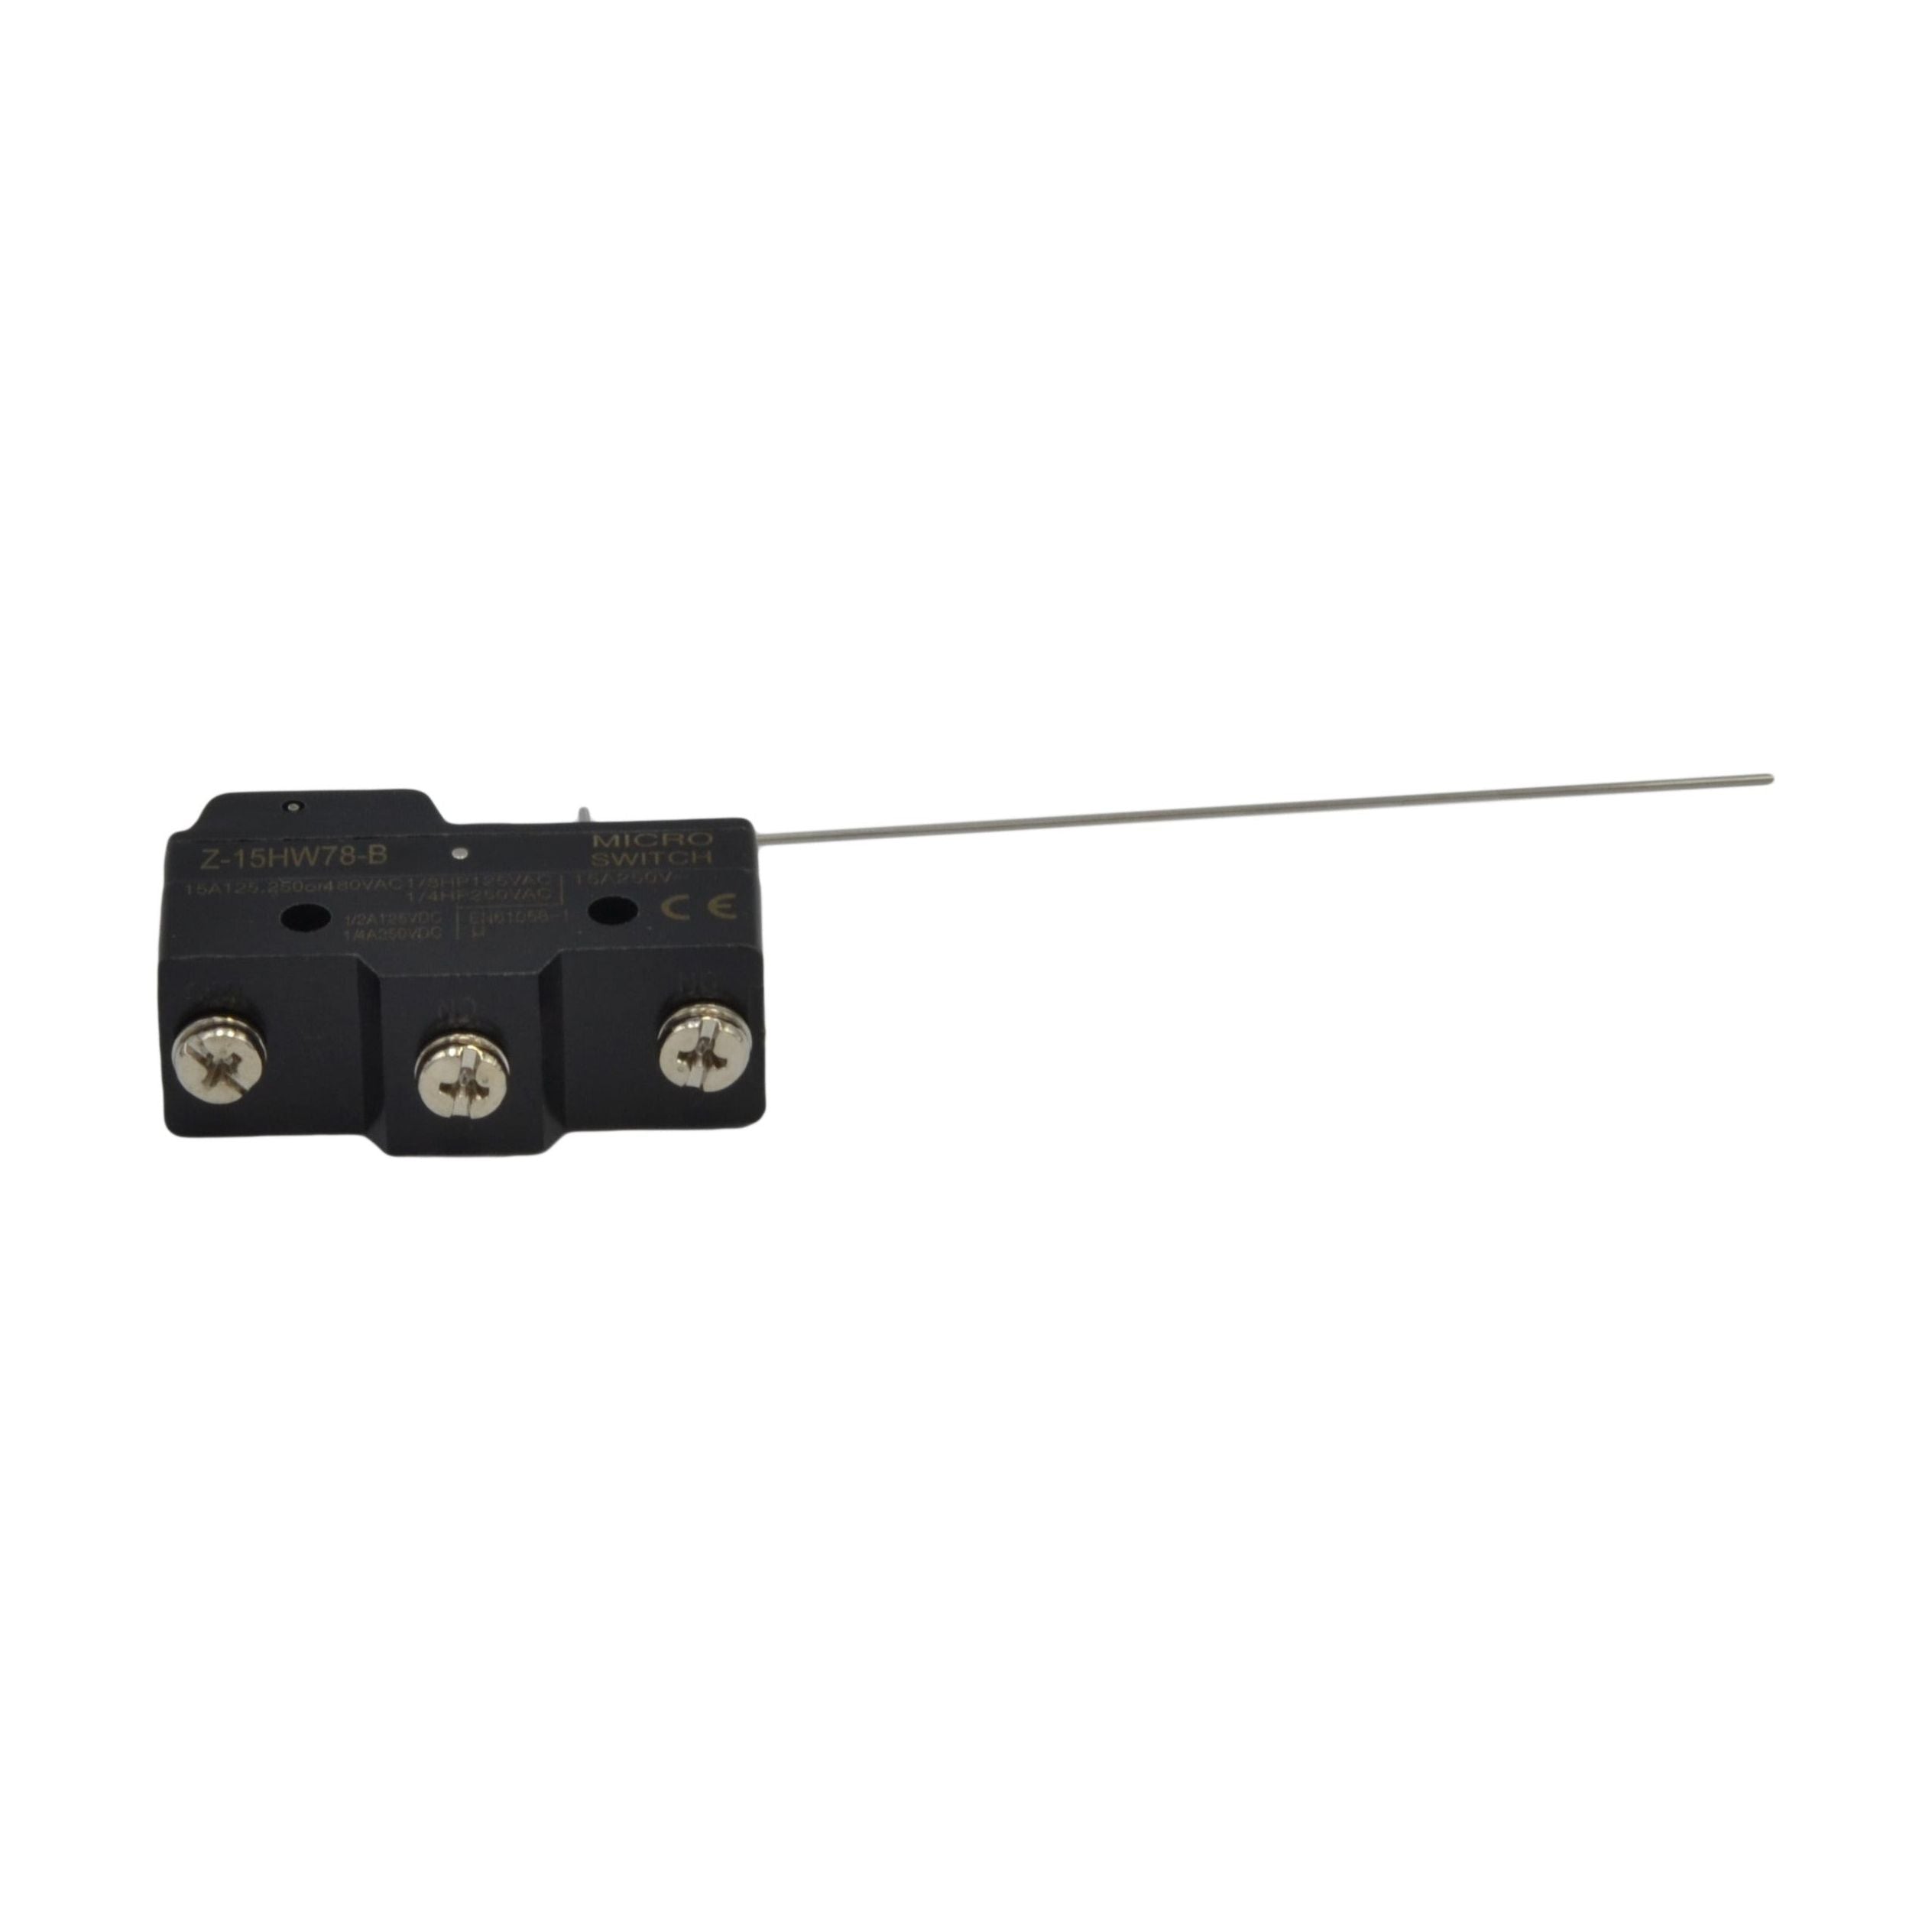 Z-15HW78-B Hinge Lever Toggle with Screw Terminals Limit Switch